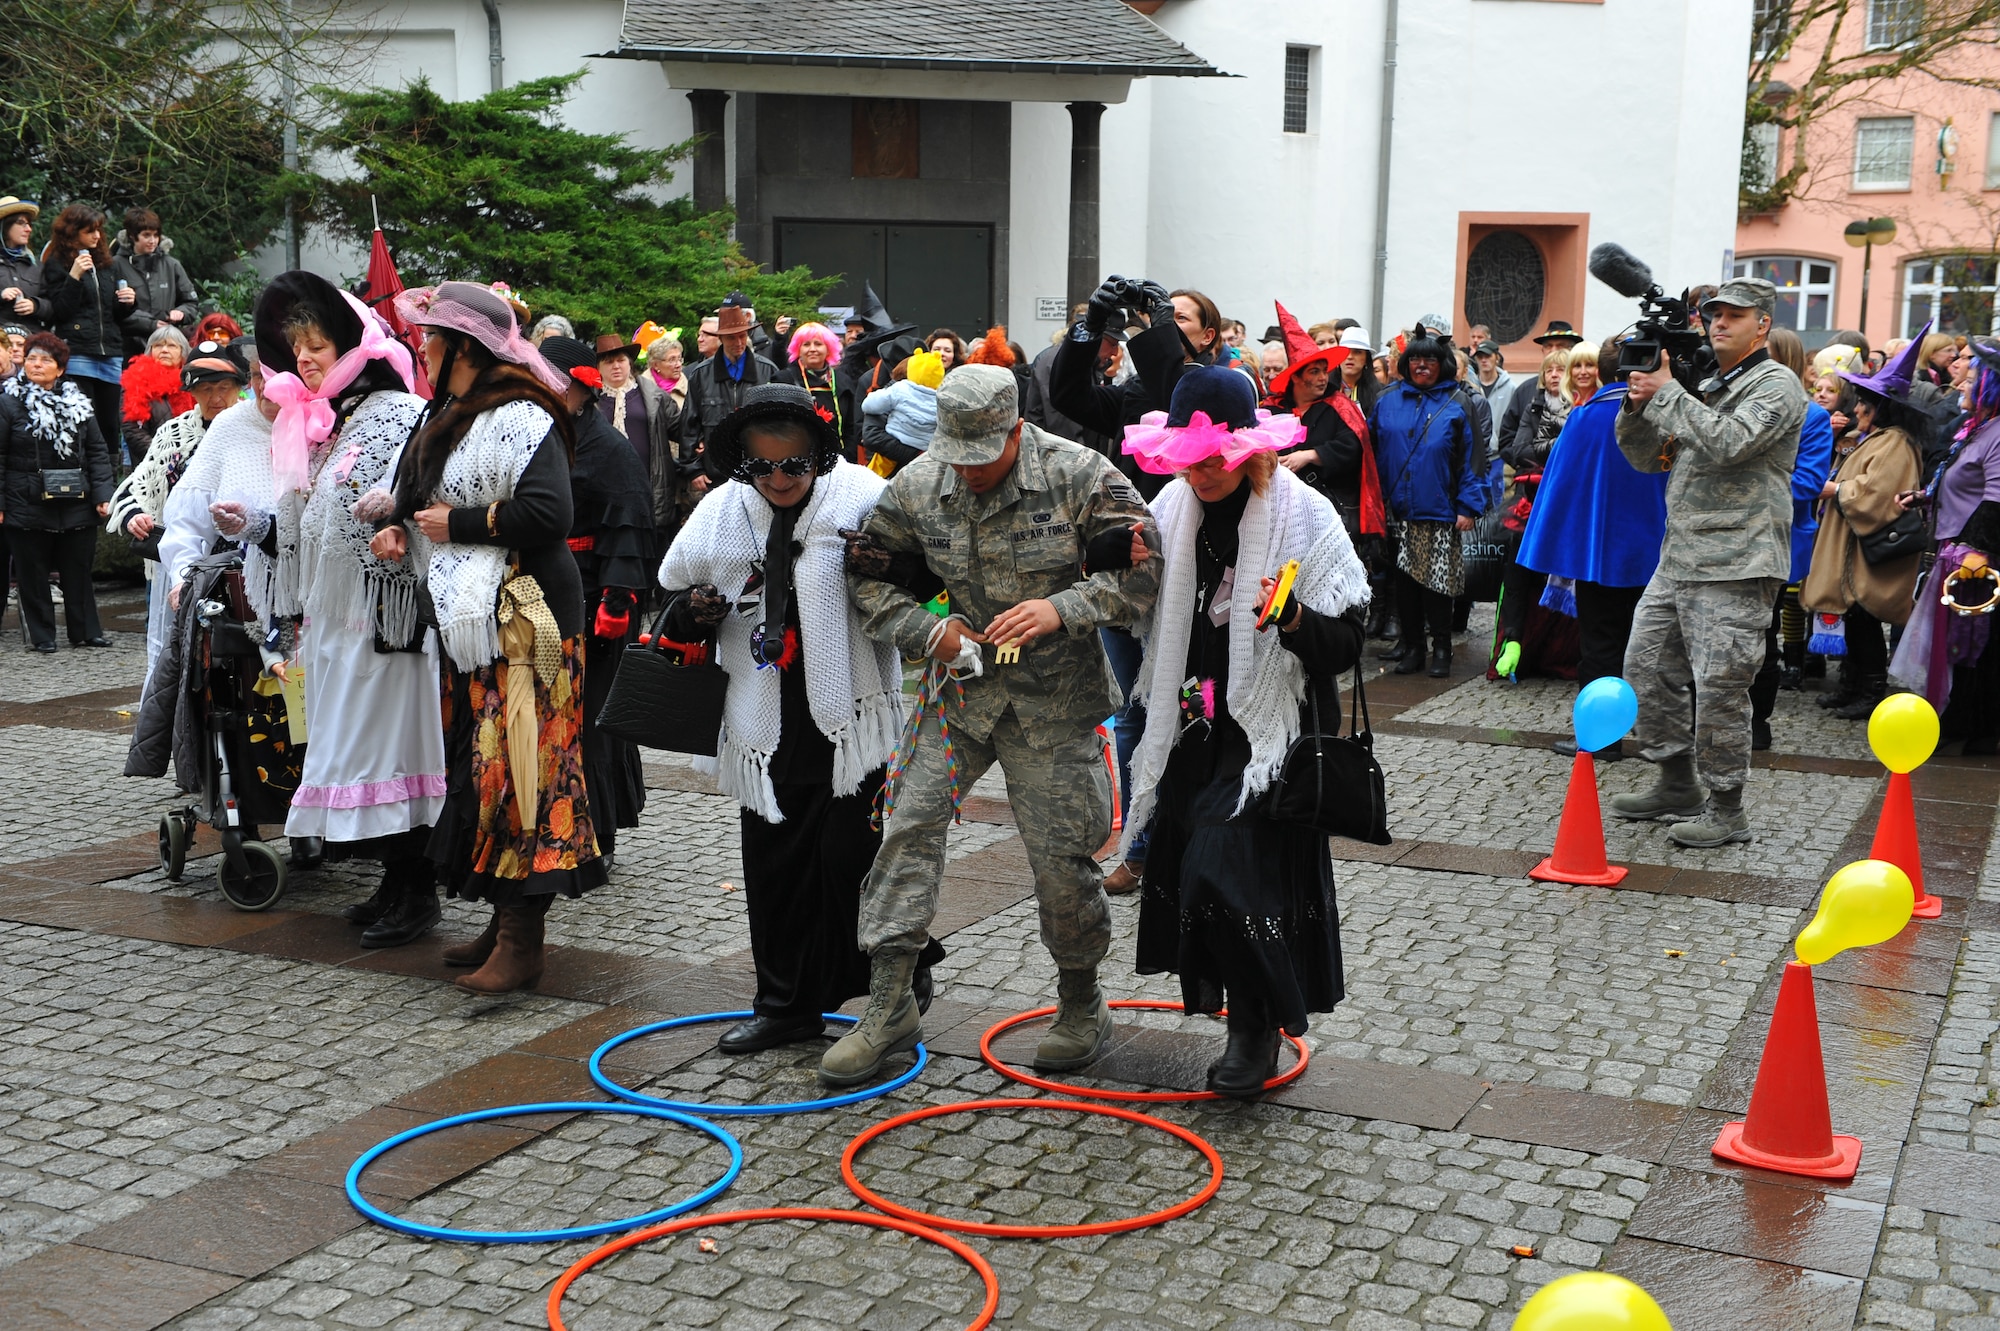 Senior Airman Urzus Gange, an engine supply technician from 52nd Logistics Readiness Squadron, is guided through hoops by female Bitburg citizens during a Fashing event at Bitburg, Germany, Feb. 16, 2012. During the German holiday tradition, Spangdahlem Airmen participate in the event by keeping the city's ceremonial key away from the Fashing "fool ladies." (U.S. Air Force photo Airman 1st Class Dillon Davis / Released) 